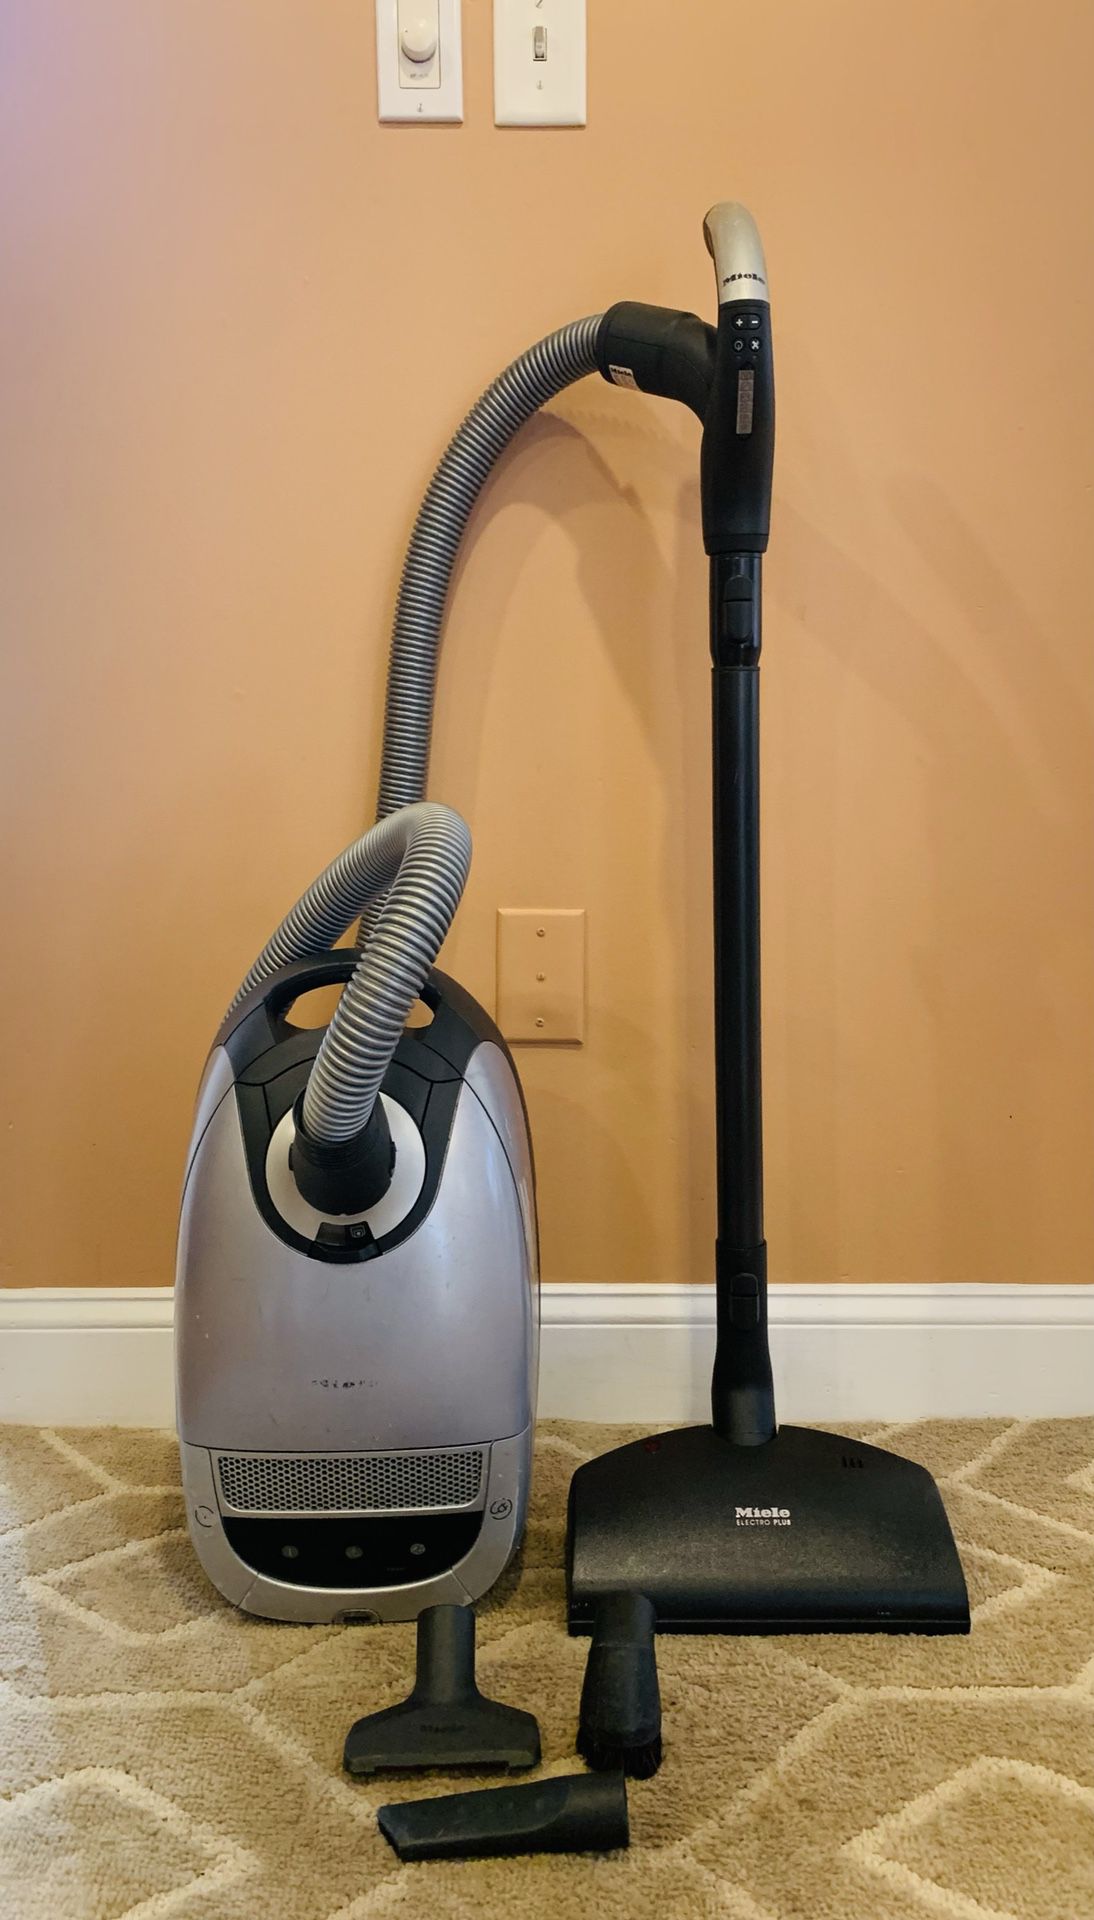 Miele Capricorn canister vacuum cleaner